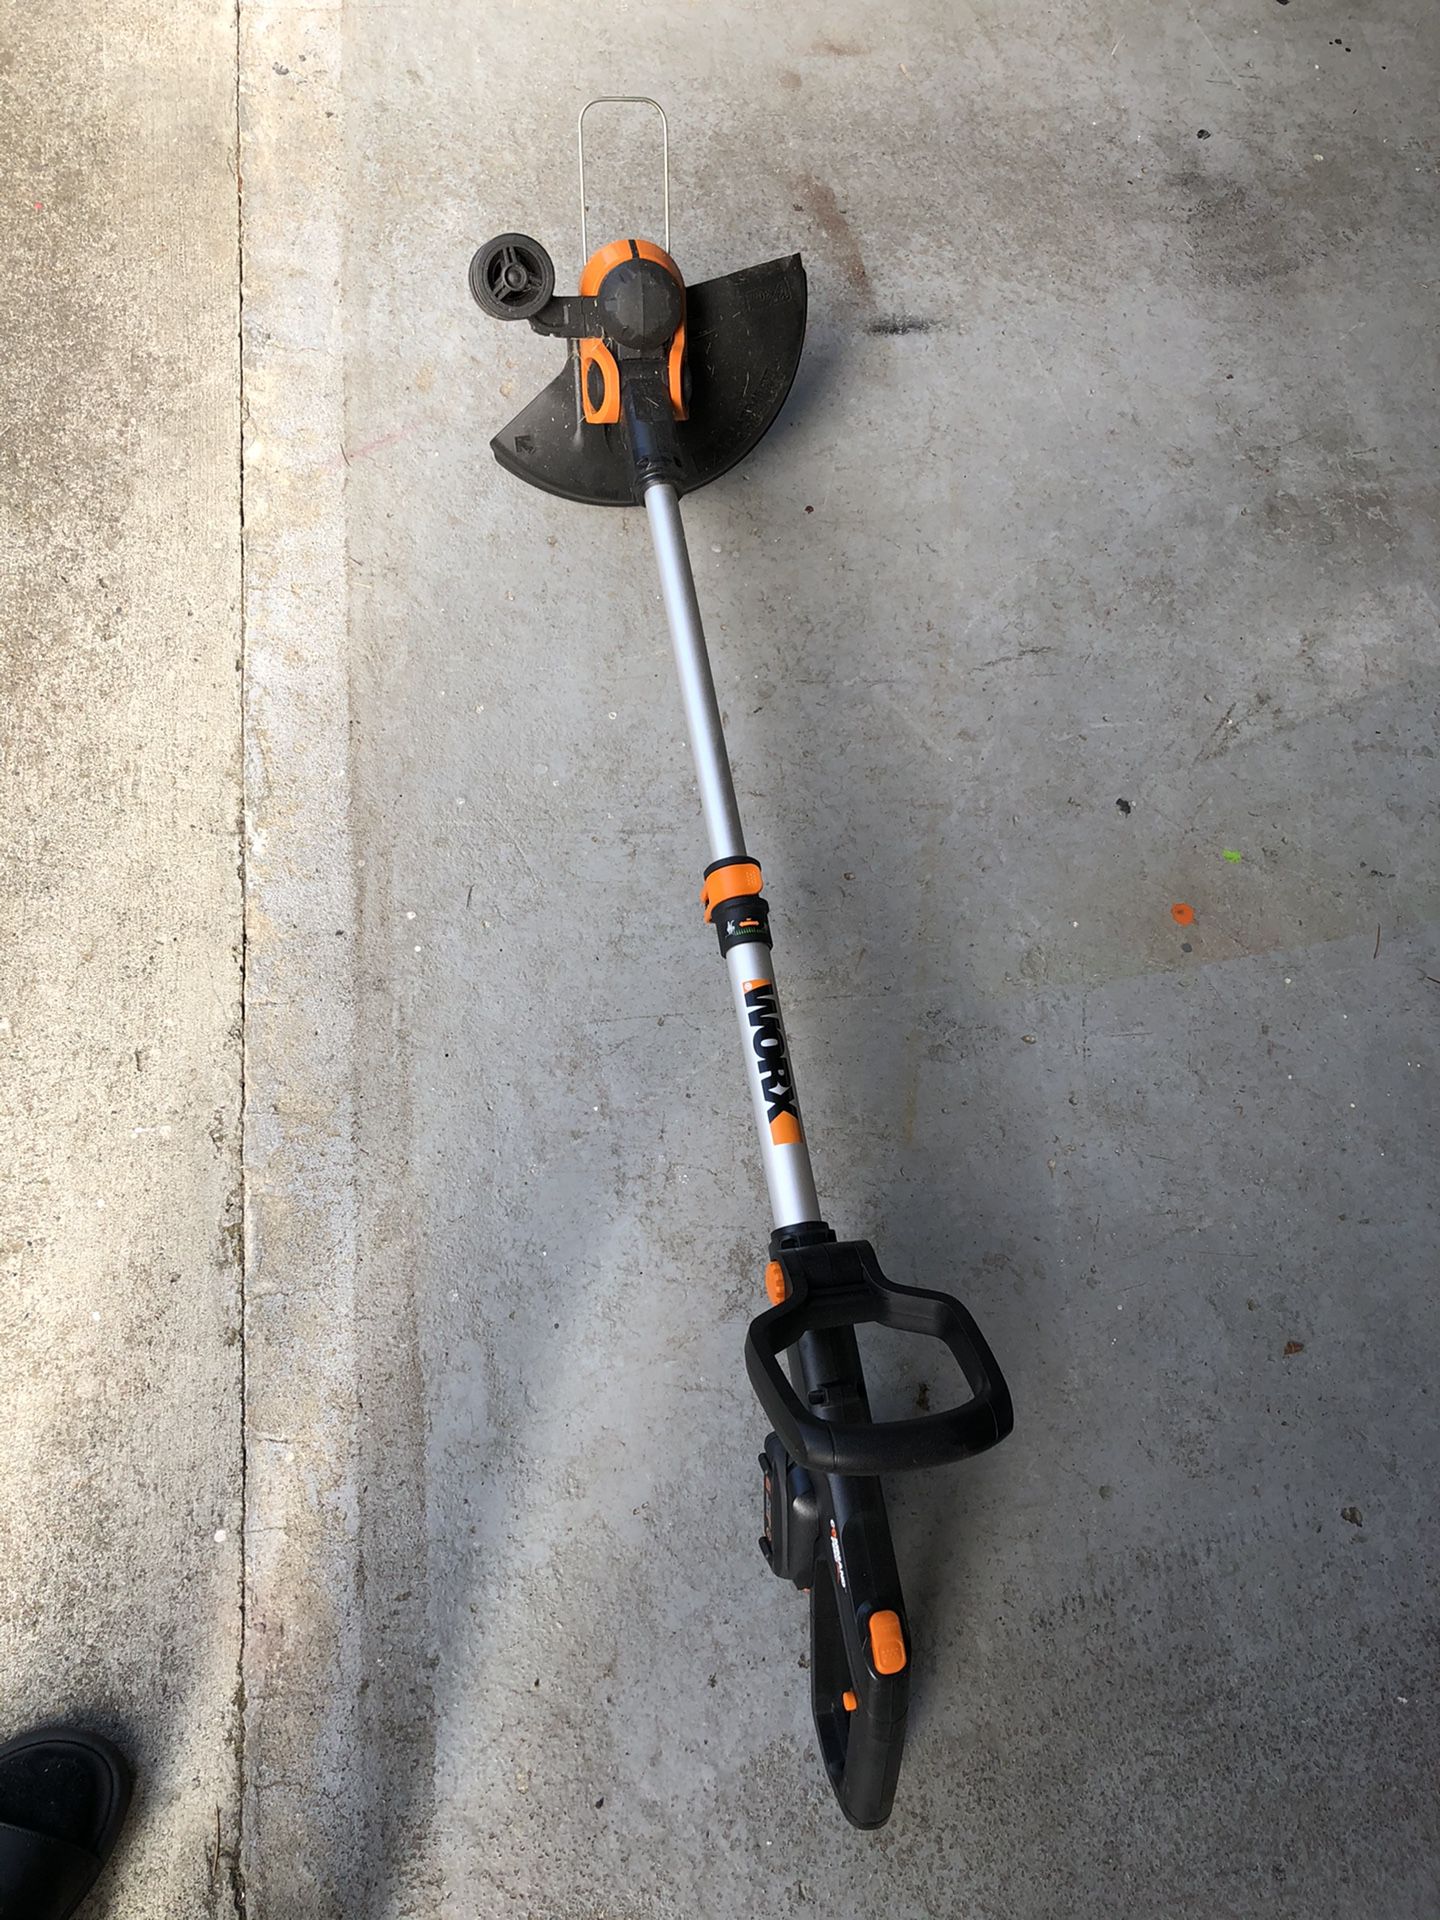 Worx trimmer / weed eater